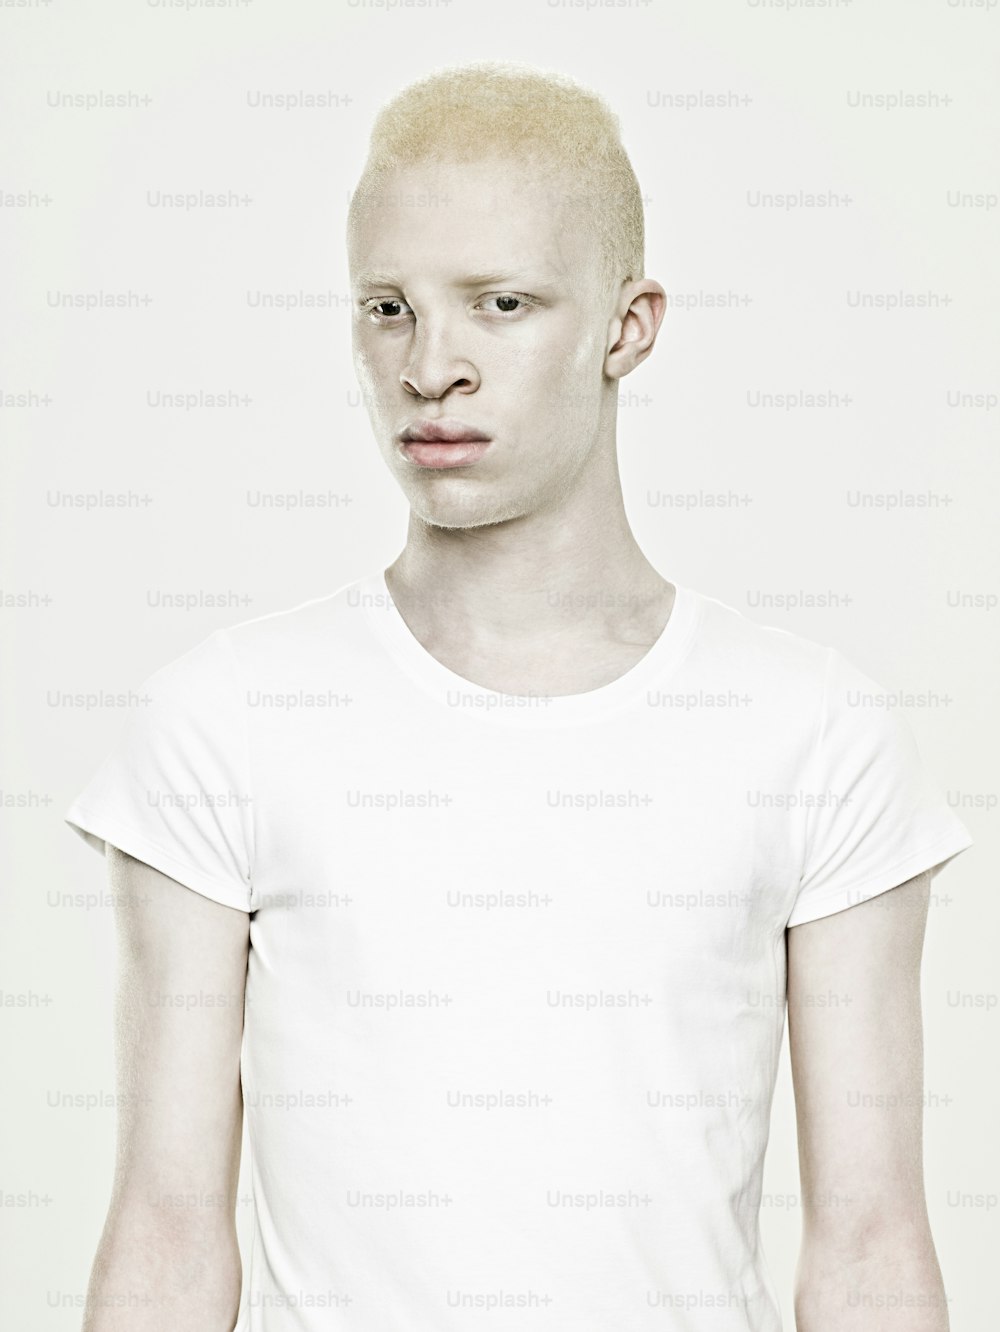 a man with a bald head and a white shirt